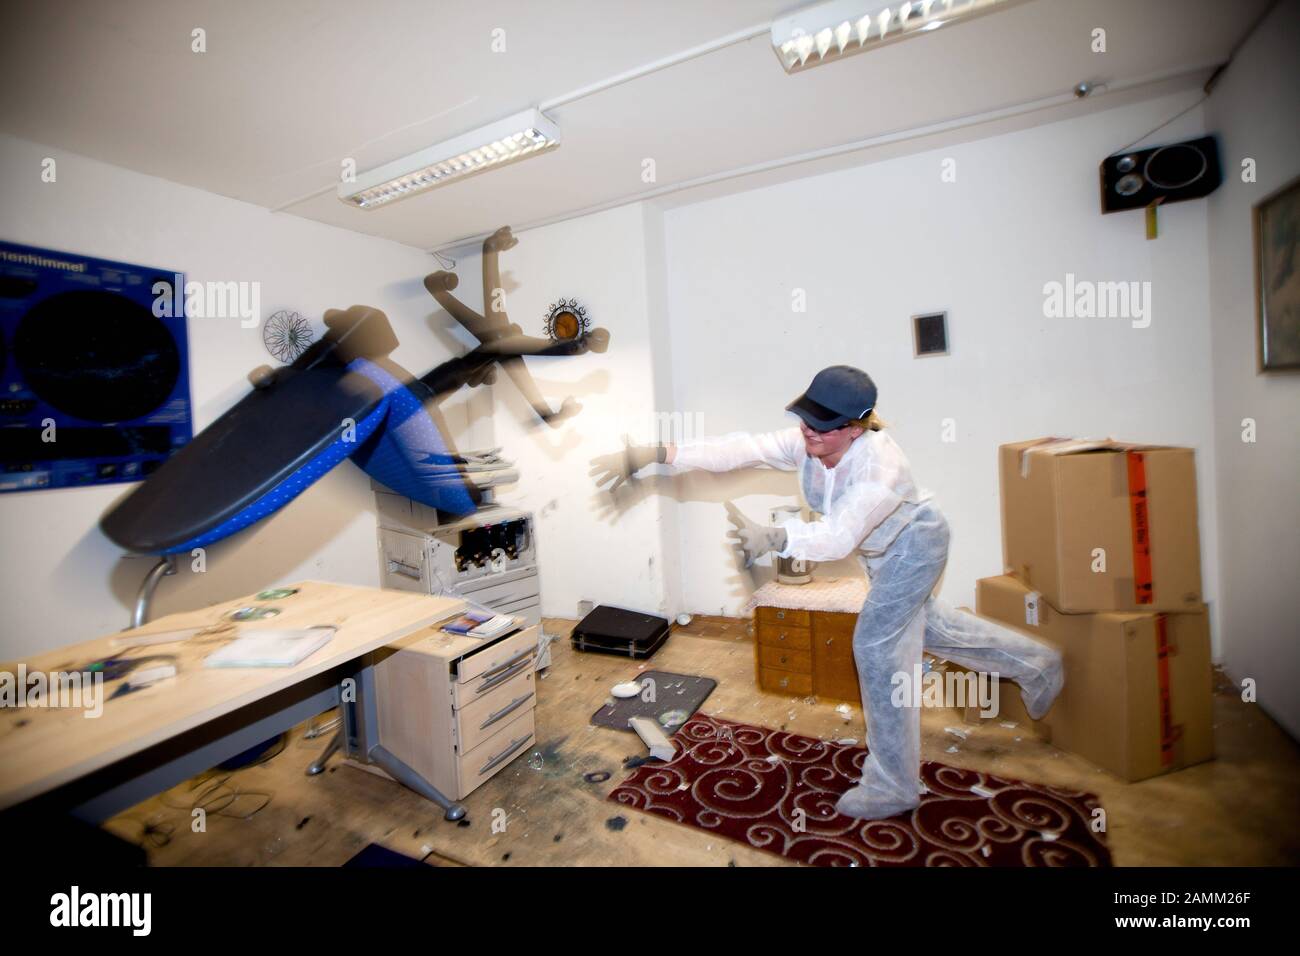 A visitor to the Wutraum smashes the furnishings of an office in the Wutraum in Pasing. The anger room can be rented for various occasions and the furniture can be destroyed. [automated translation] Stock Photo